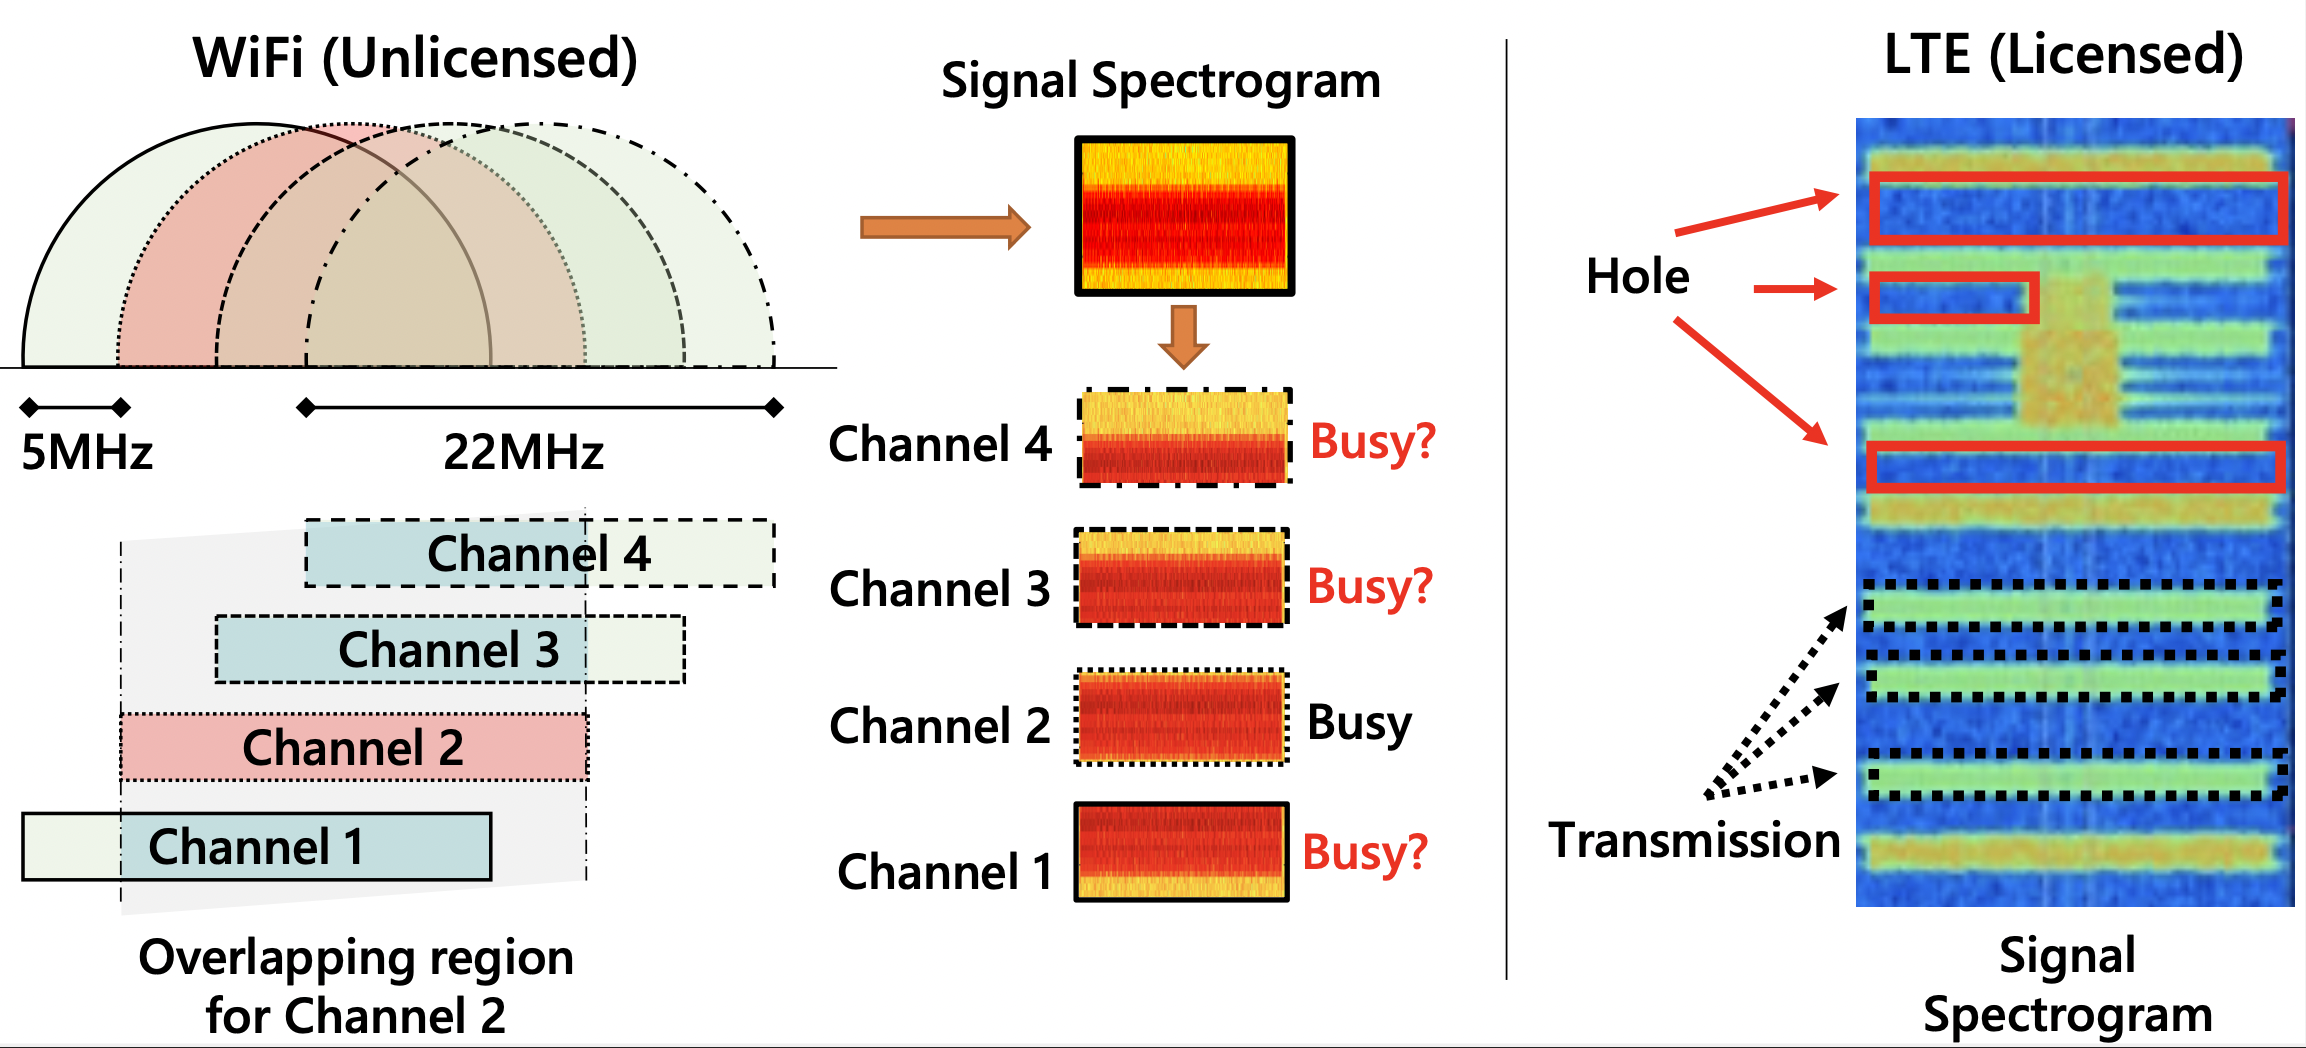 WiFi and LTE Spectrum Holes